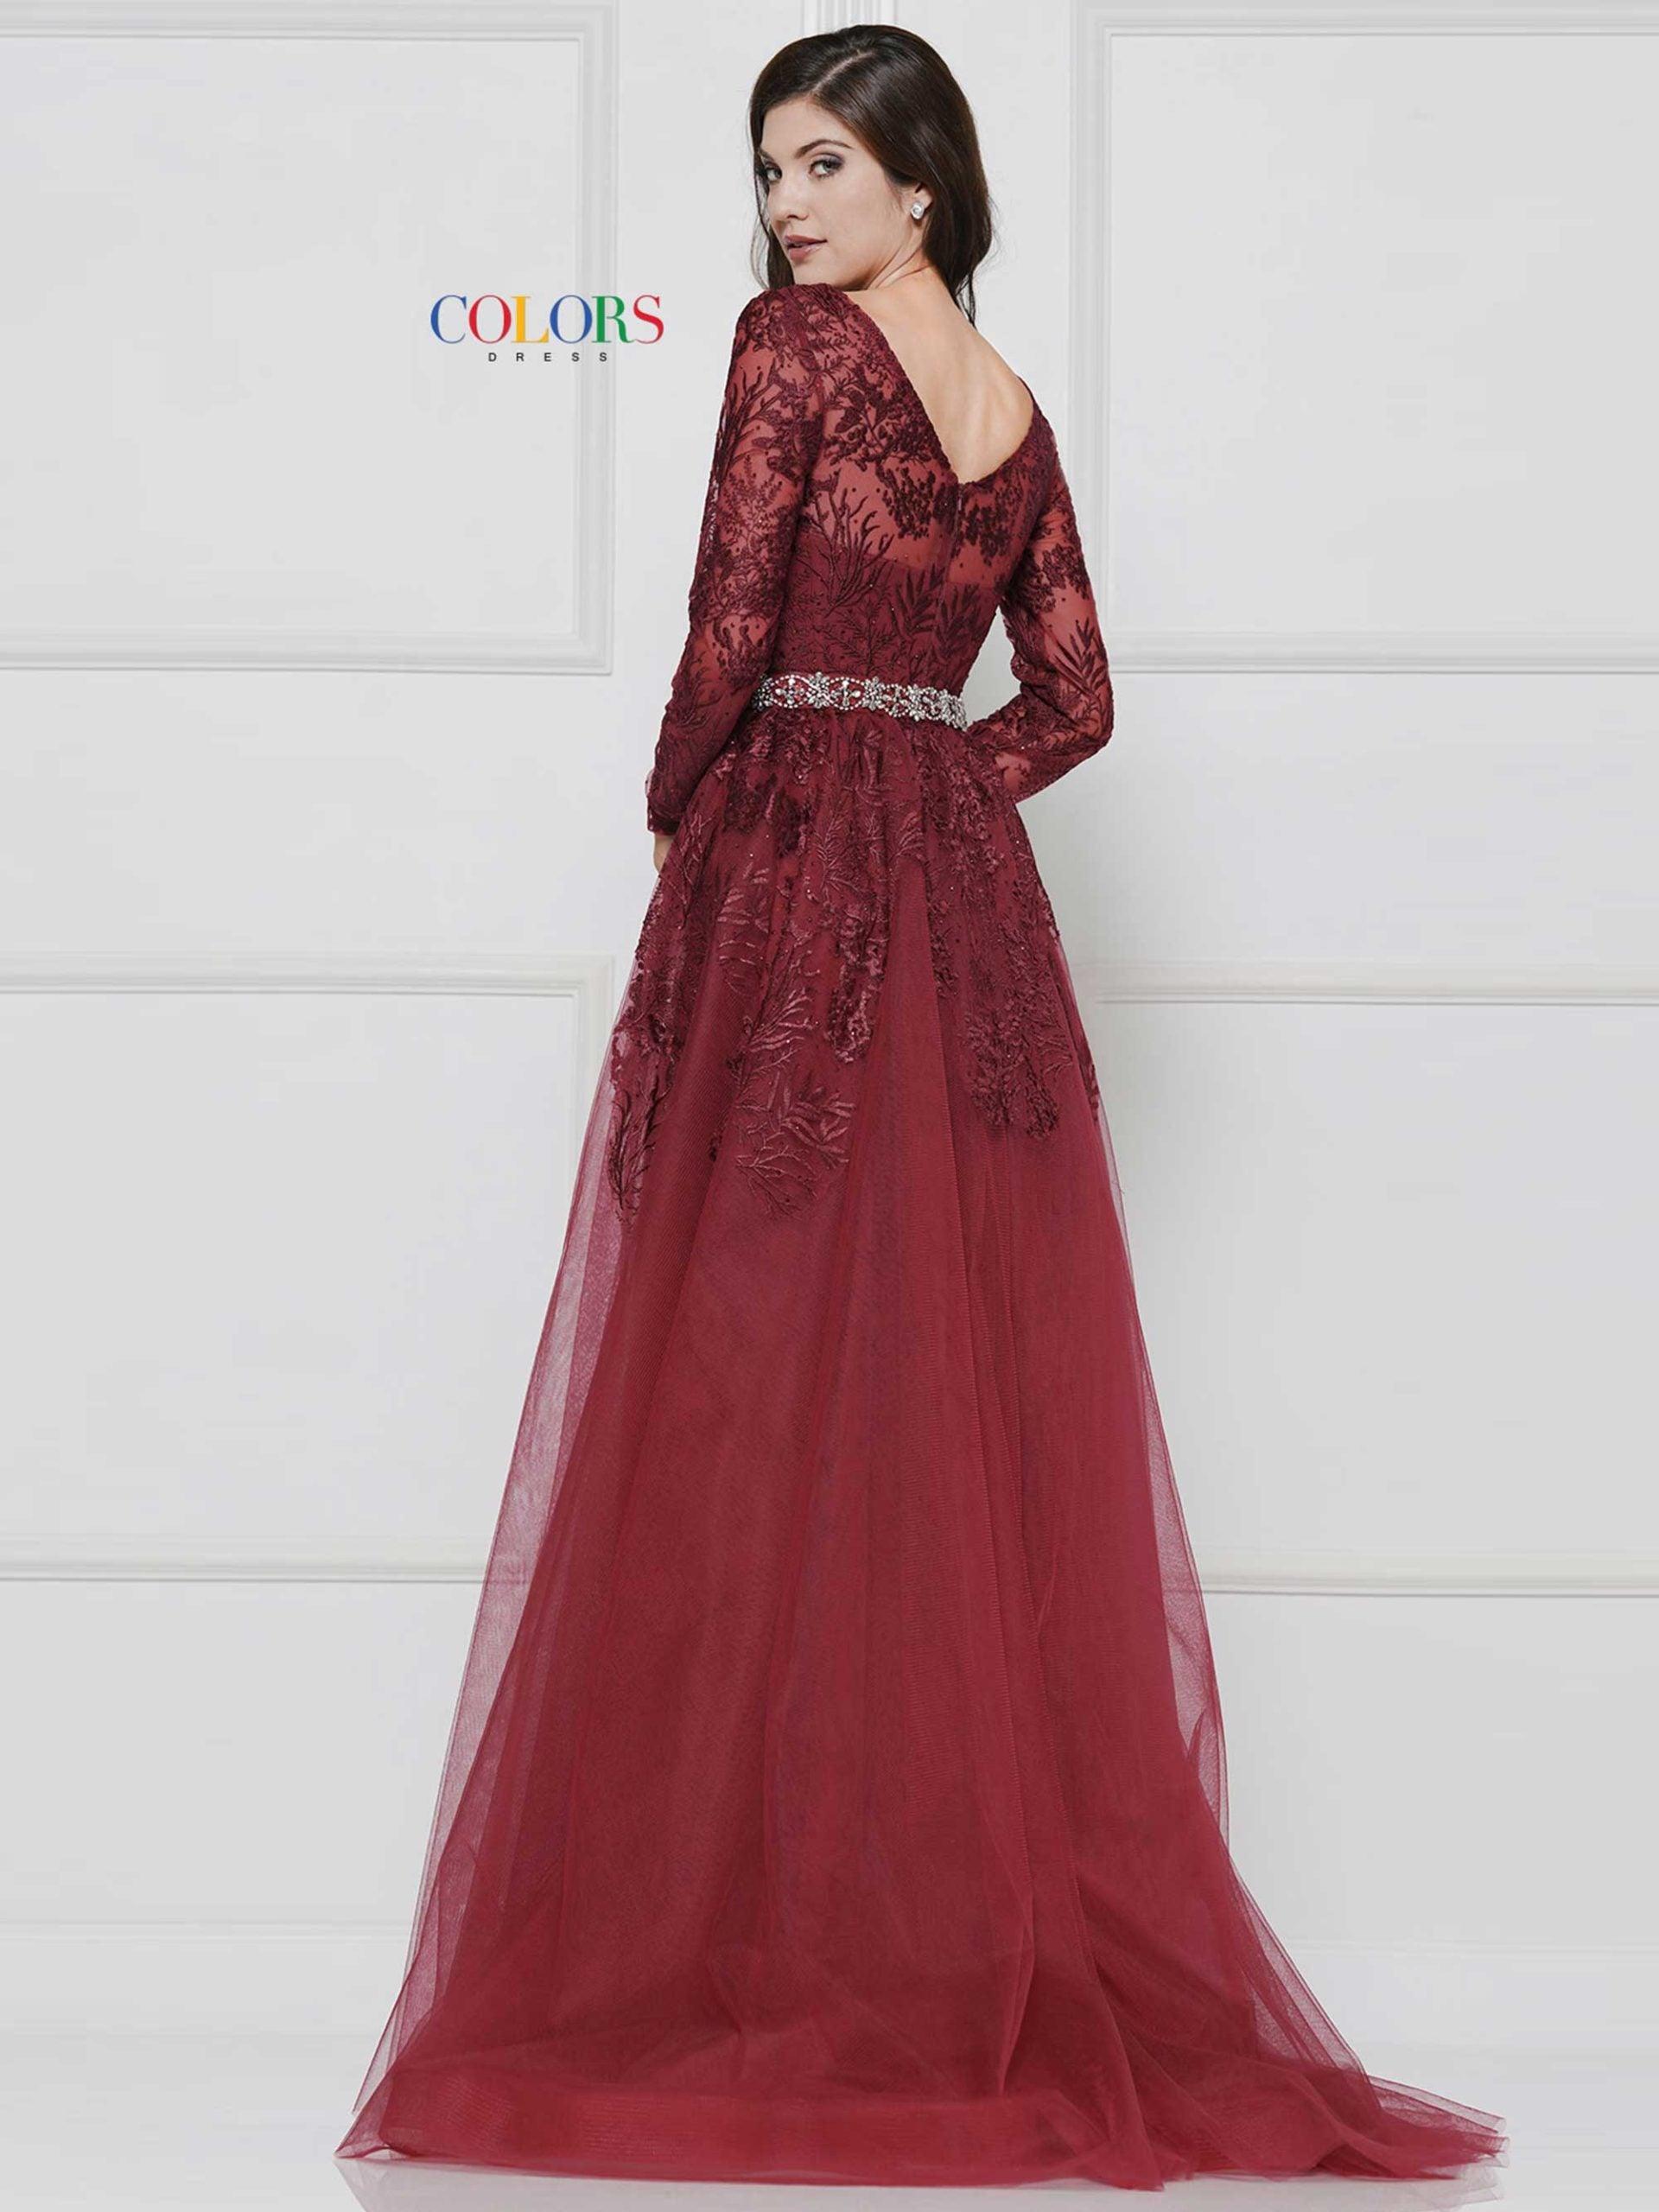 Colors Long Sleeve Formal Prom Dress 1830SL - The Dress Outlet